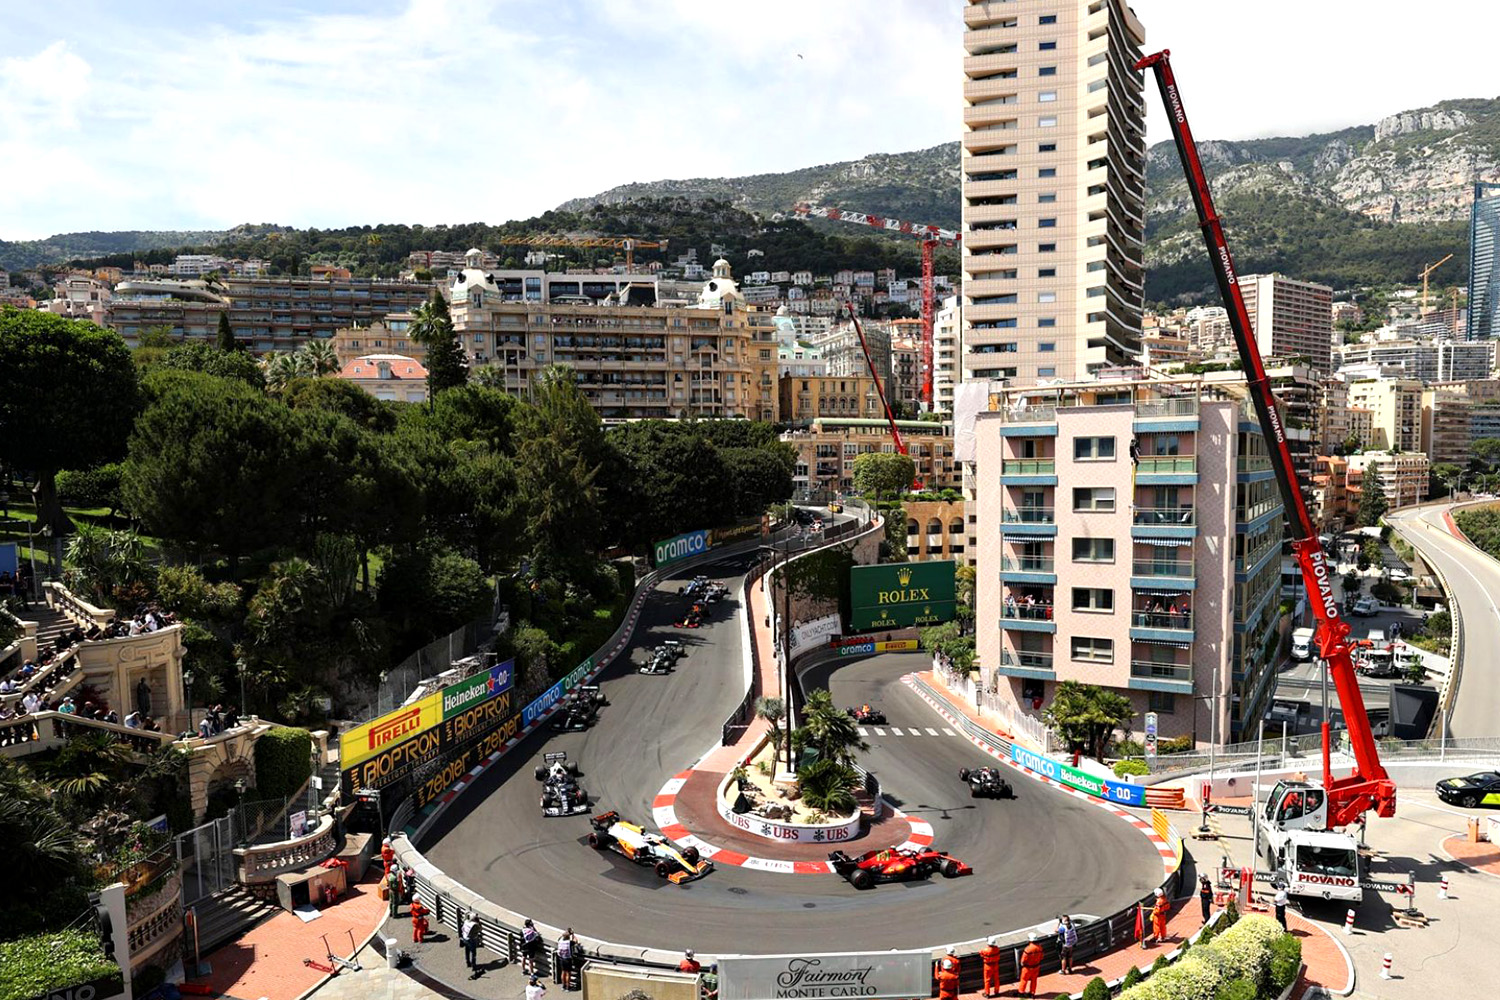 This year's race was the first Monaco Grand Prix aired lived on ABC.